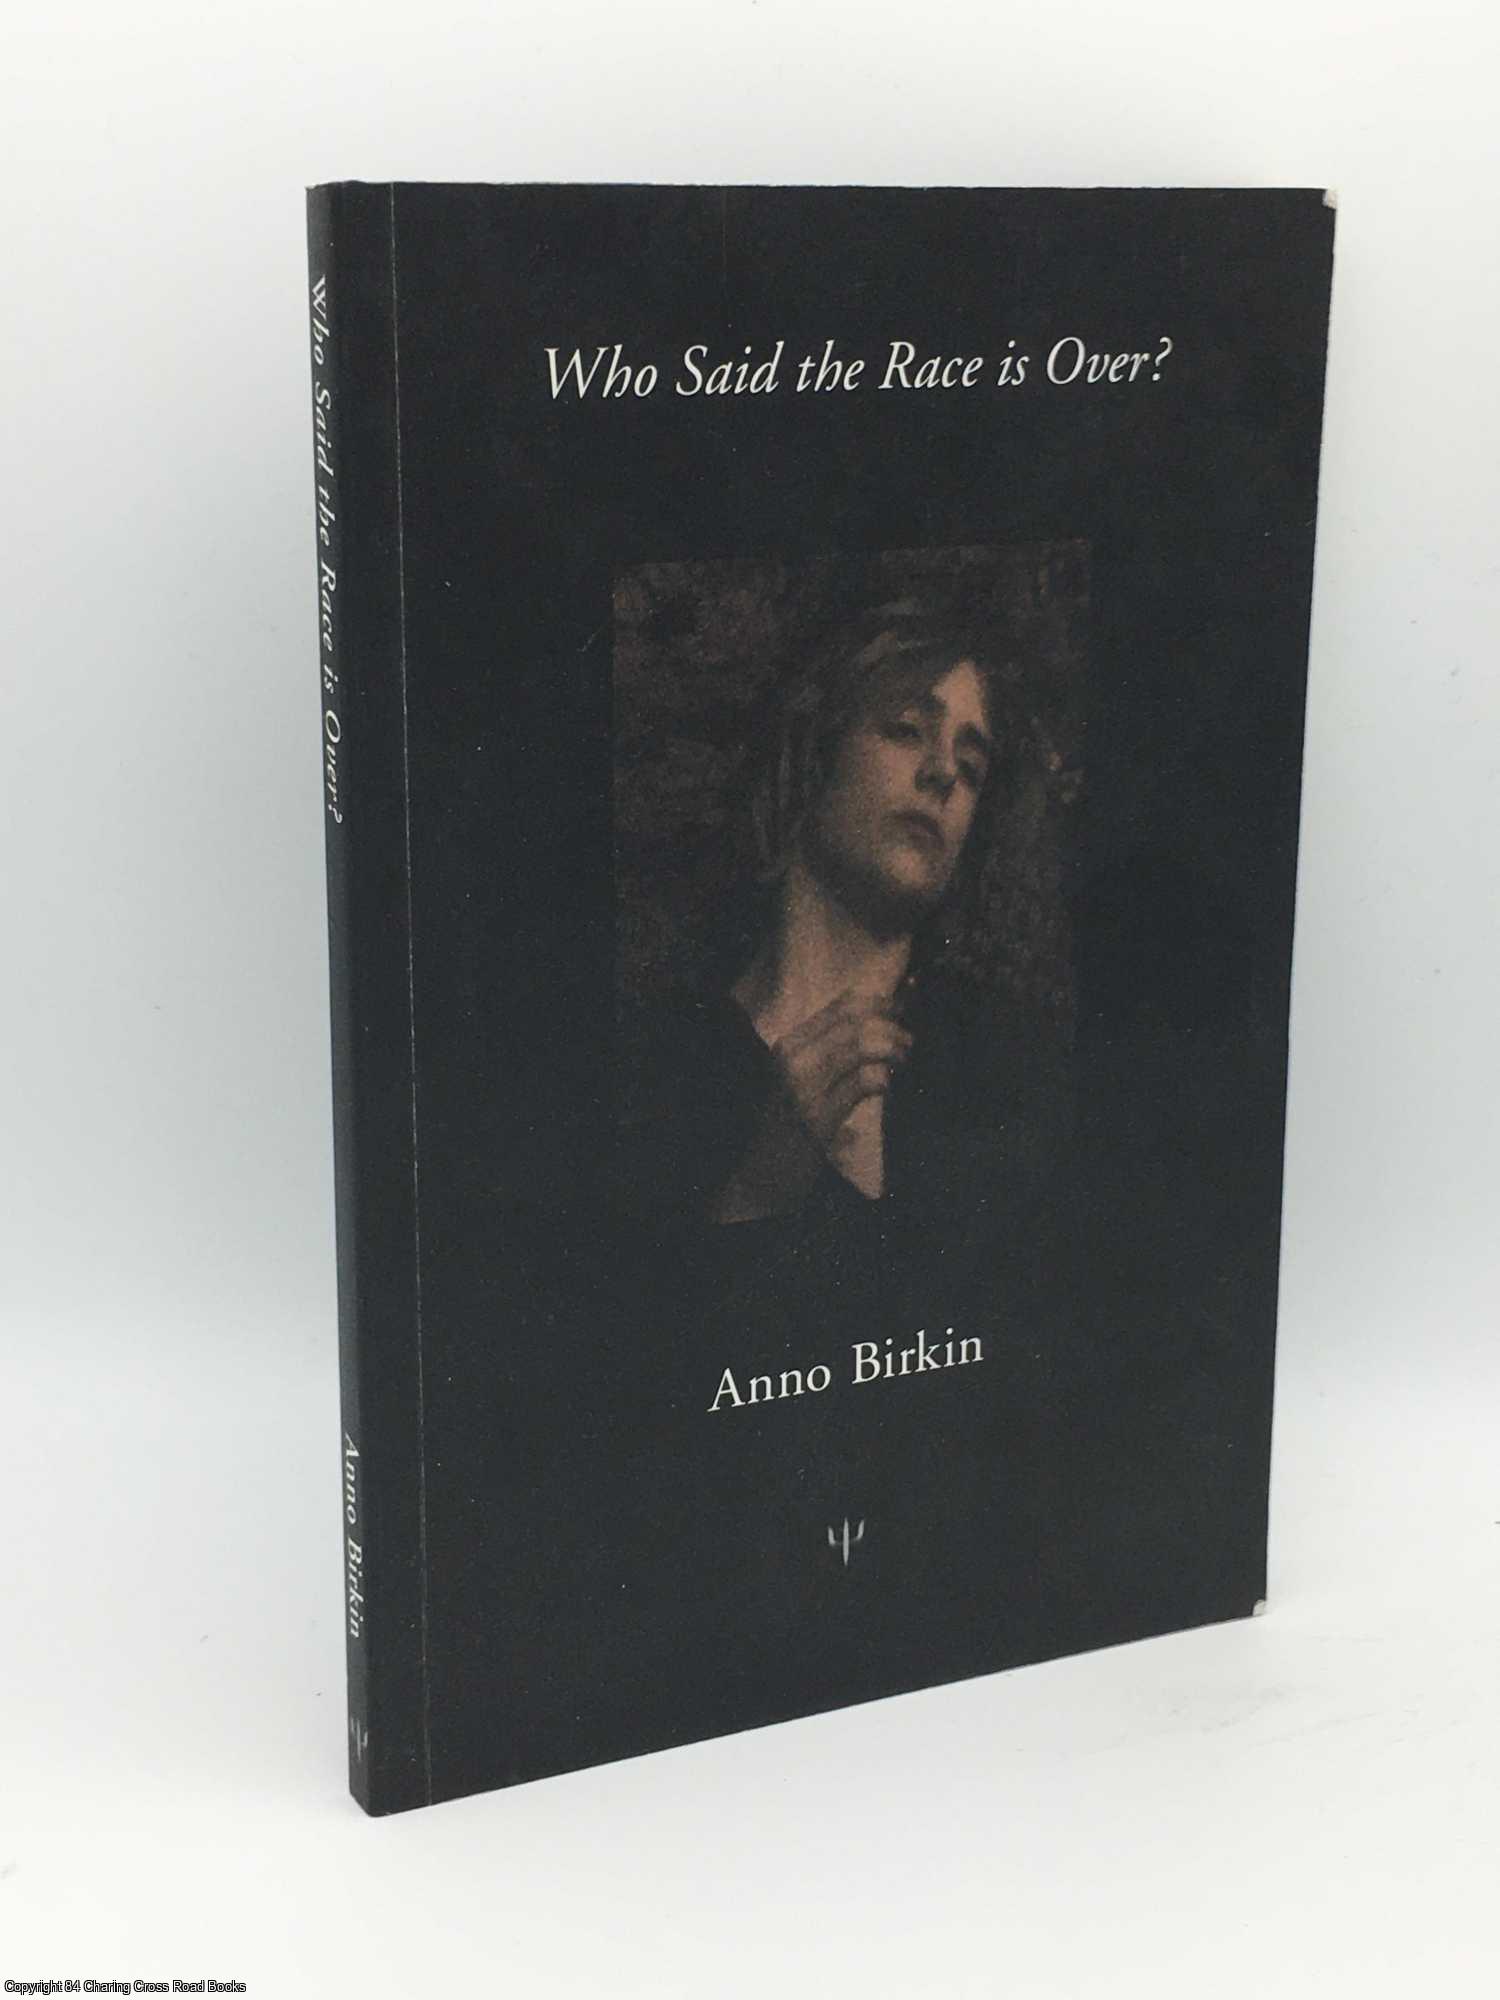 Birkin, Anno; Robinson, Bruce - Who Said the Race is Over? [Limited Edition]